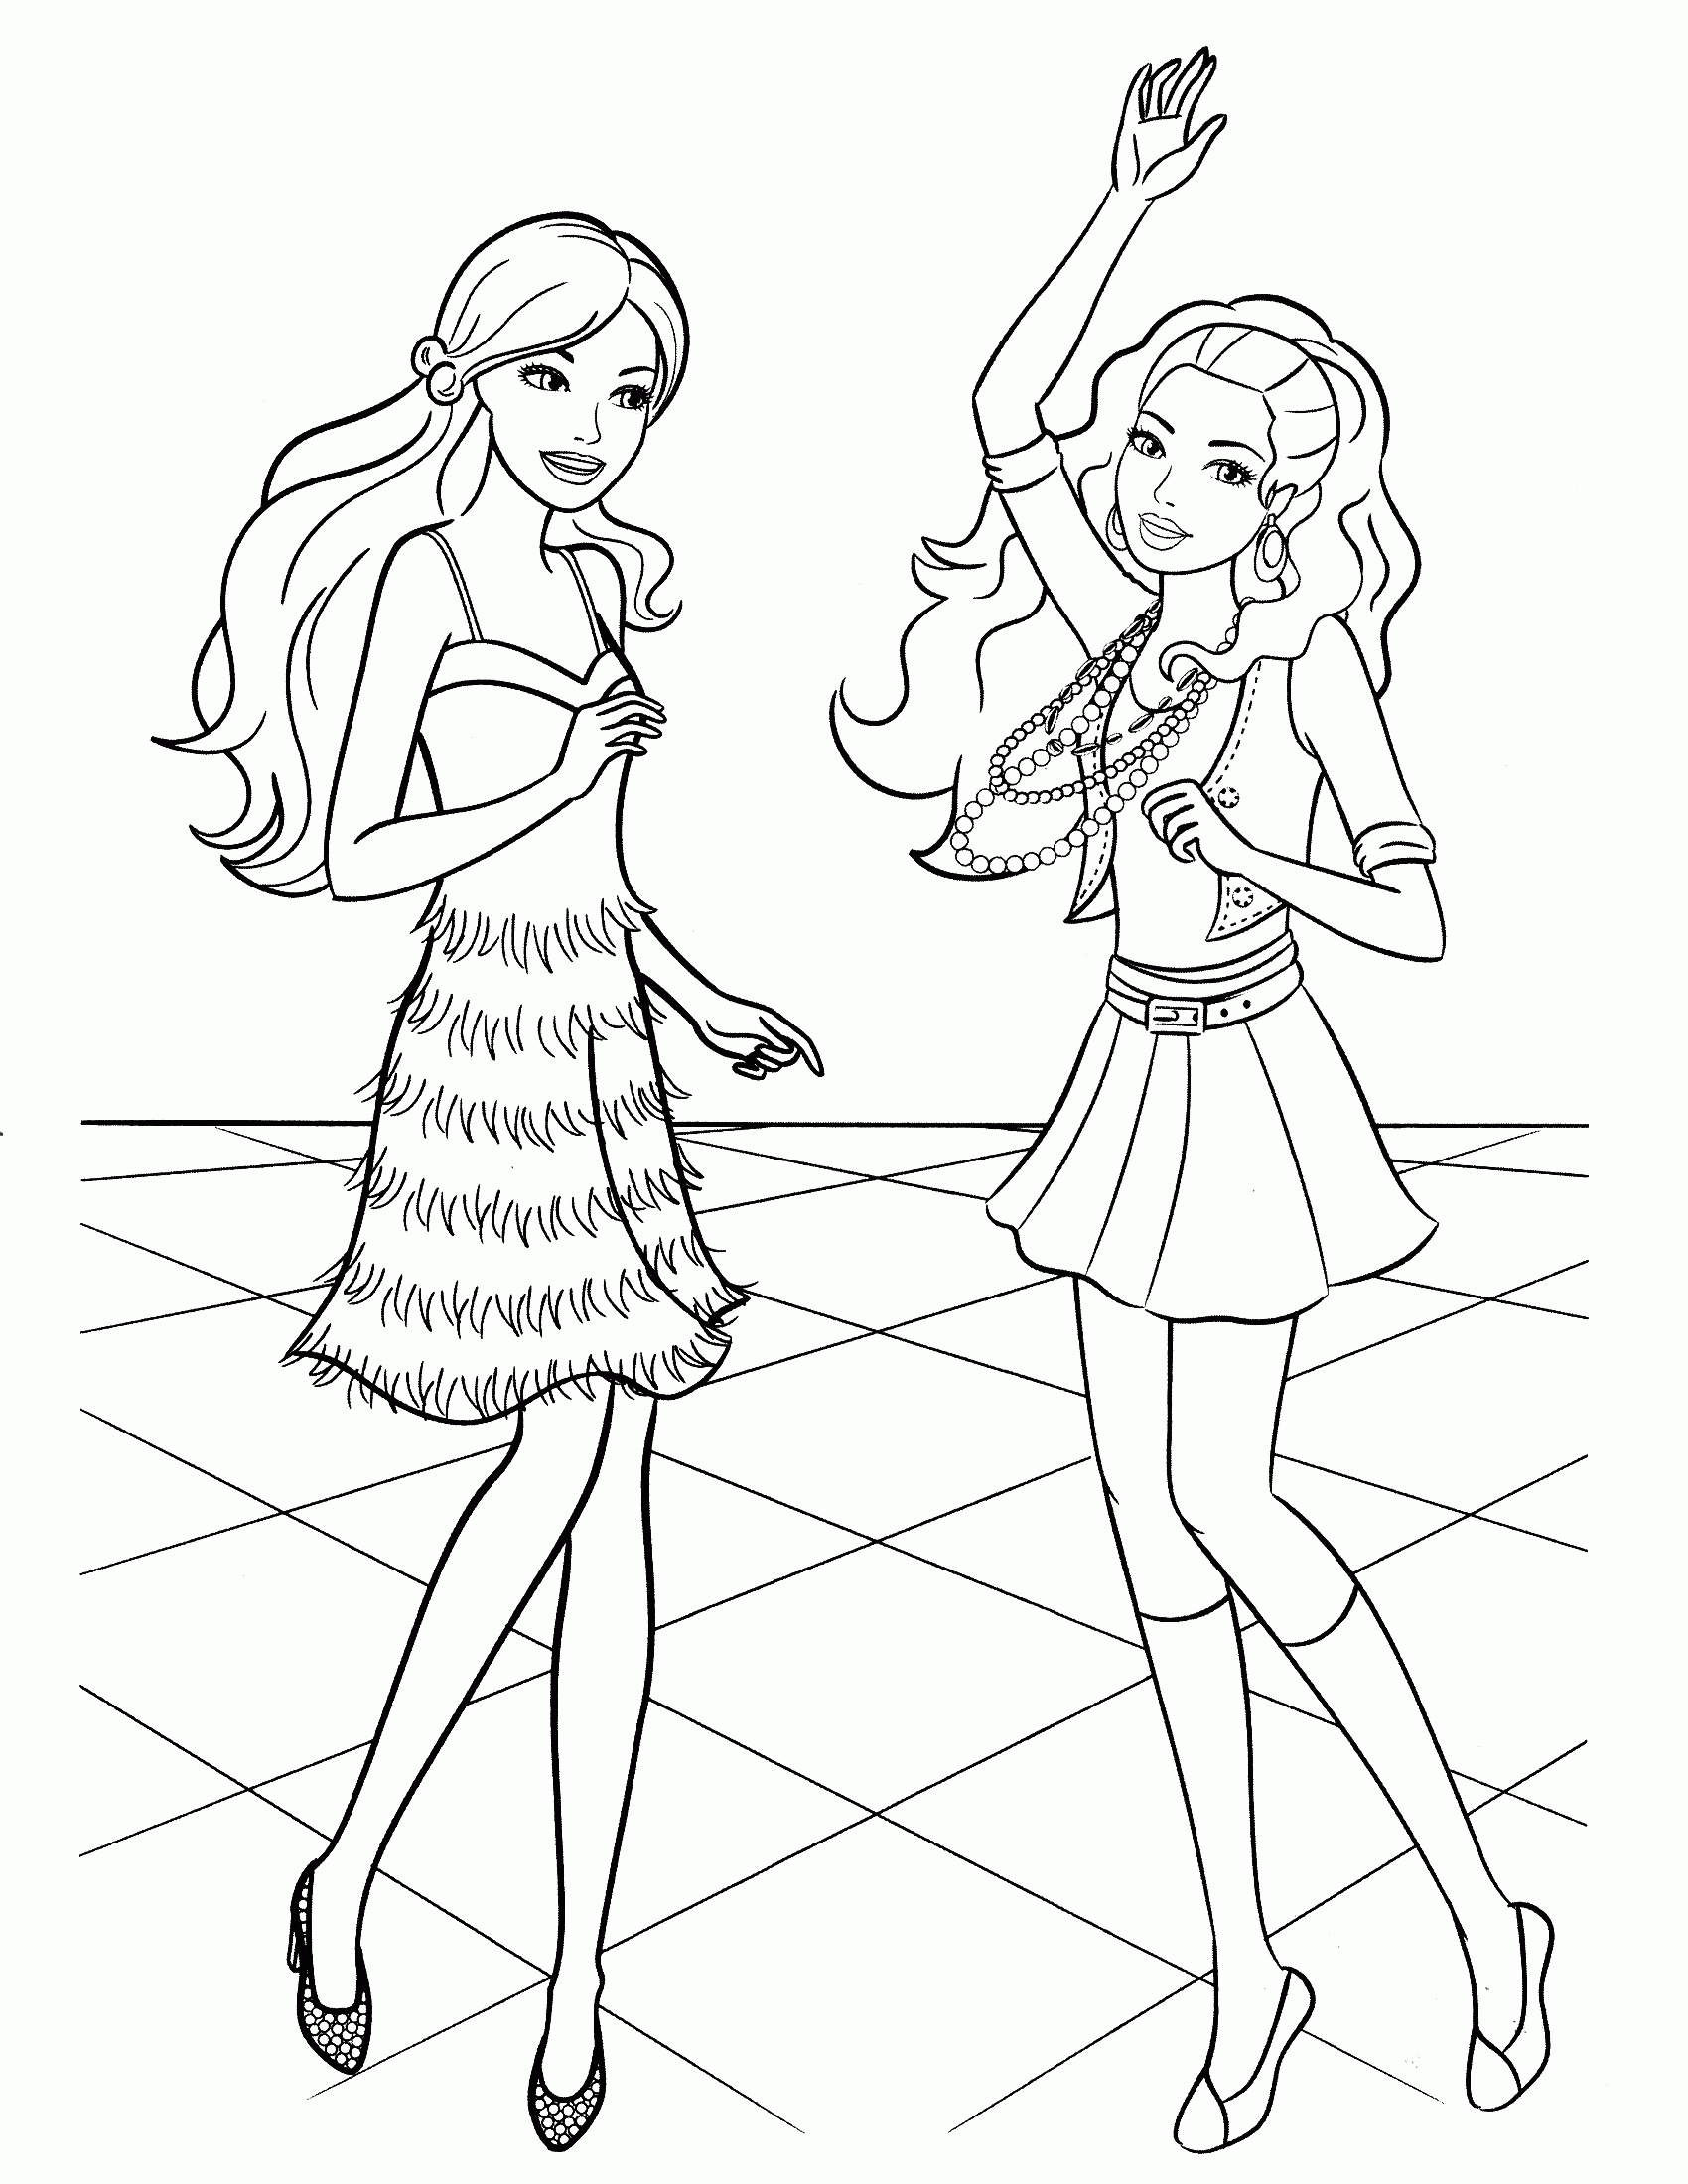 Barbies - Coloring Pages for Kids and for Adults